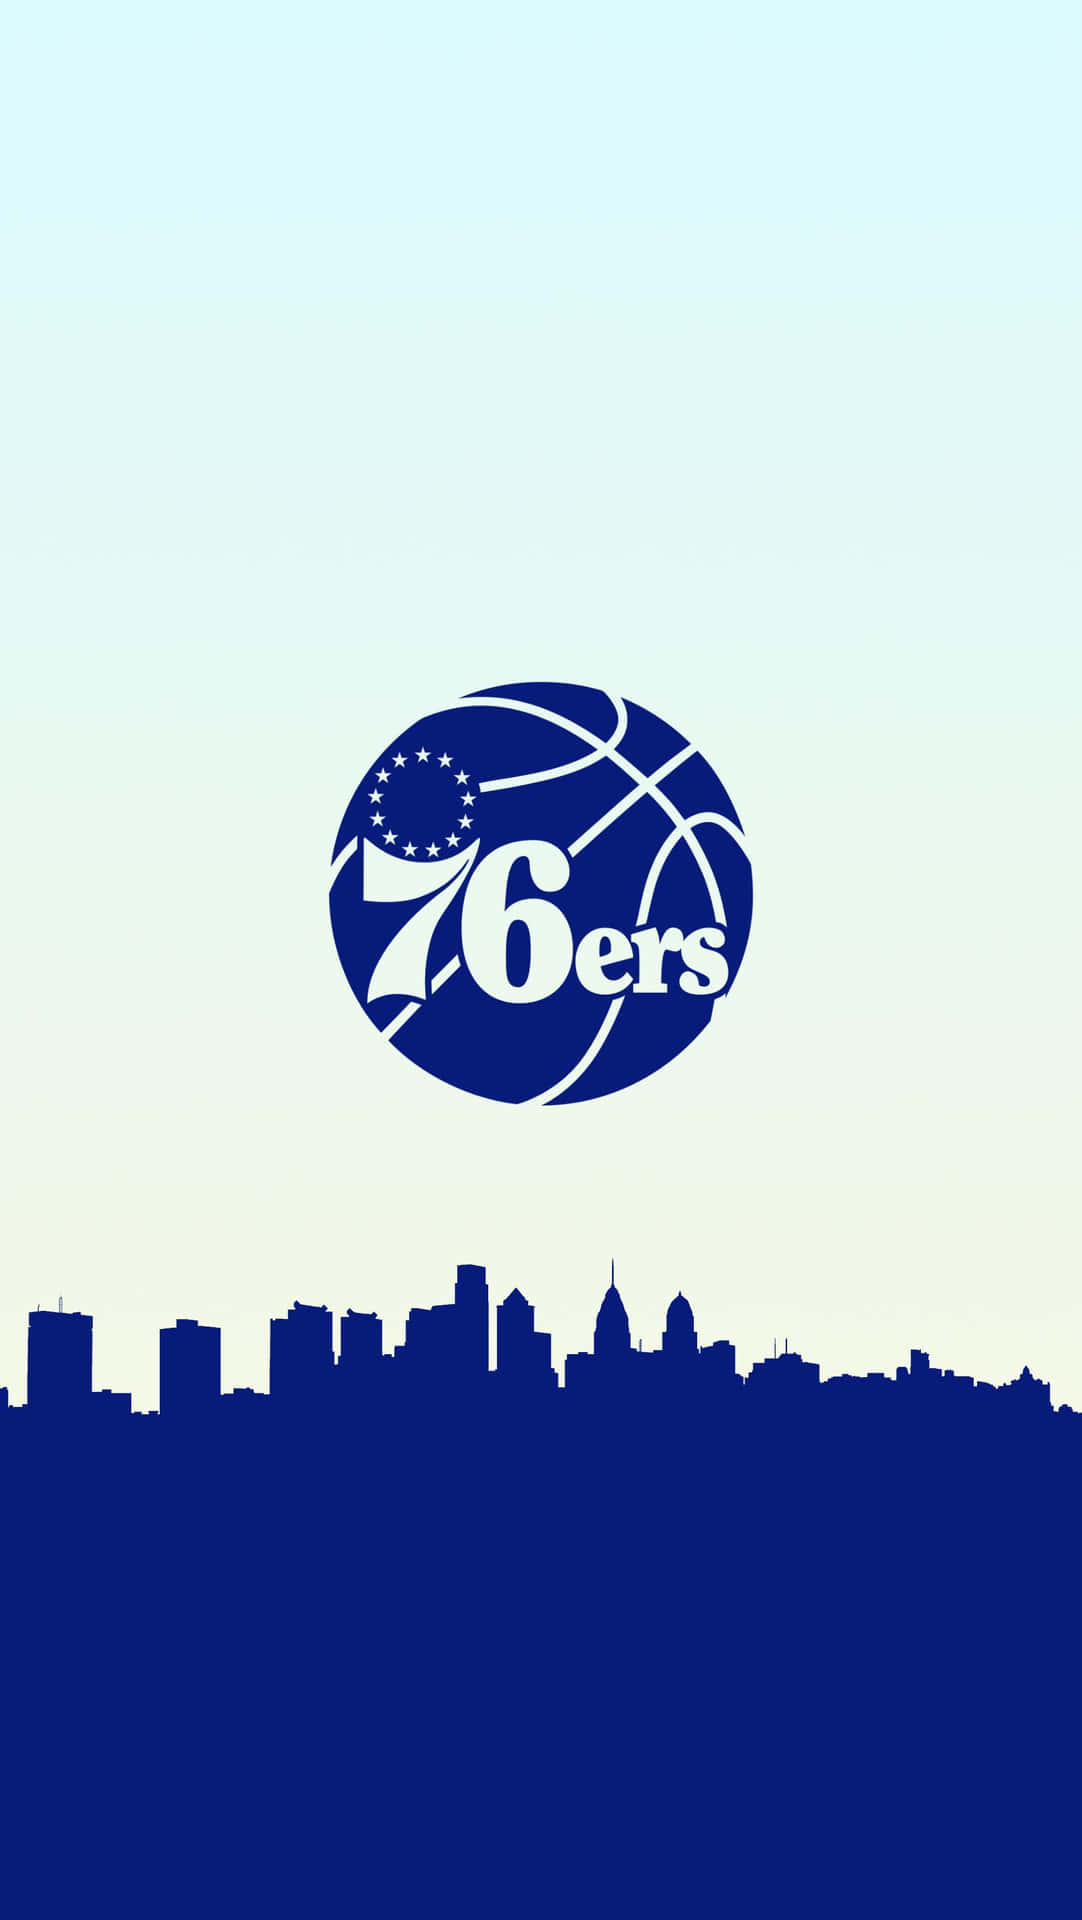 Cheer on the Philadelphia 76ers with your own personalized iPhone Wallpaper